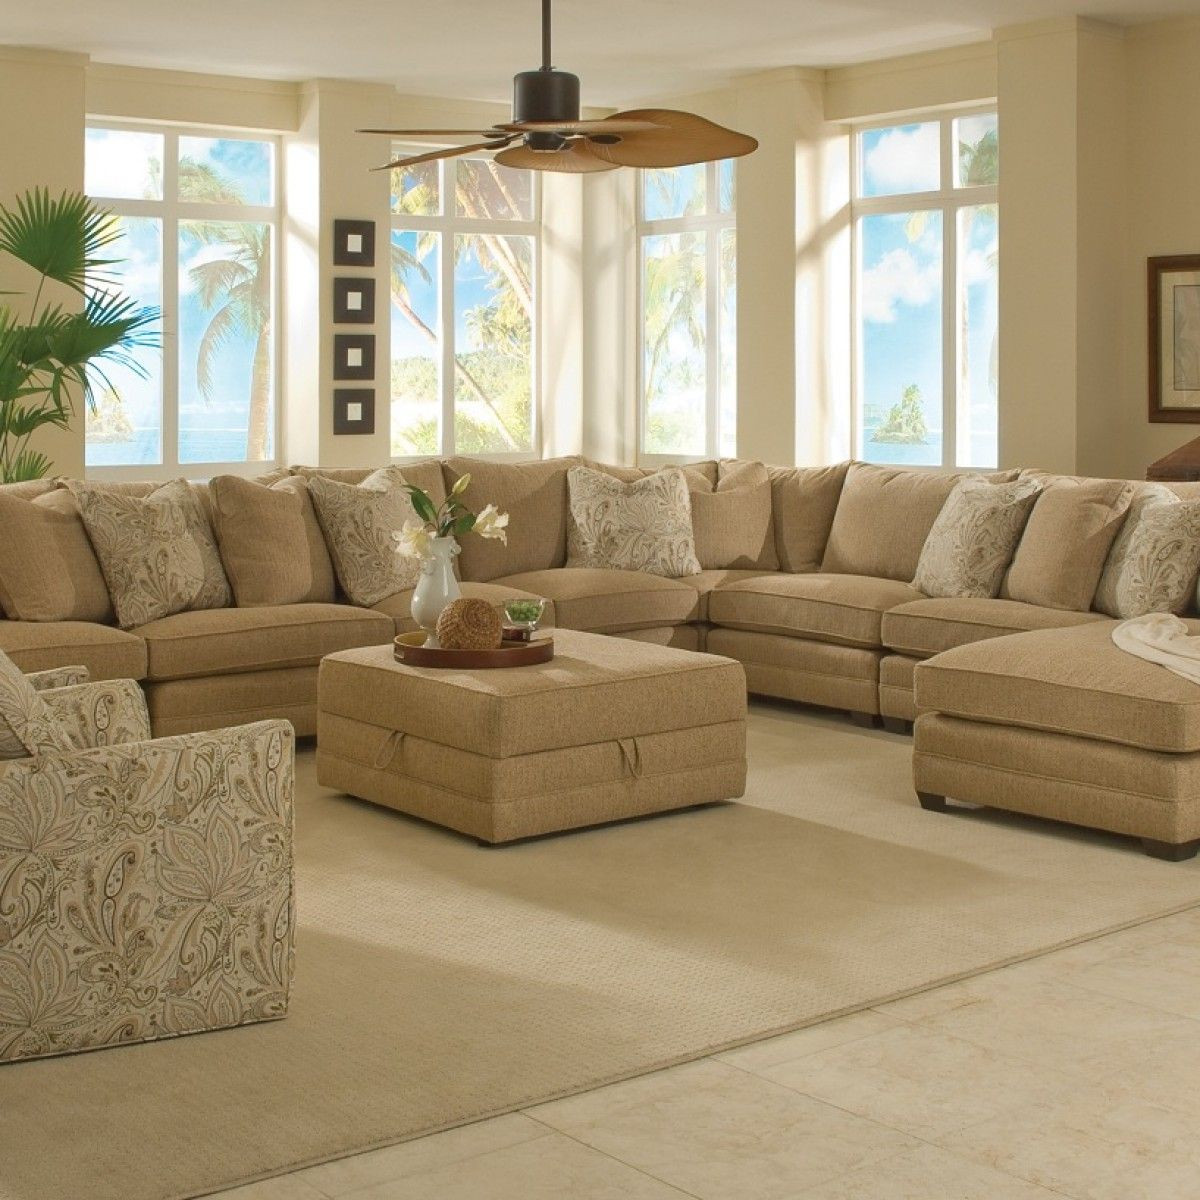 Living Room Decor With Sectional
 Magnificent Sectional Sofas in 2019